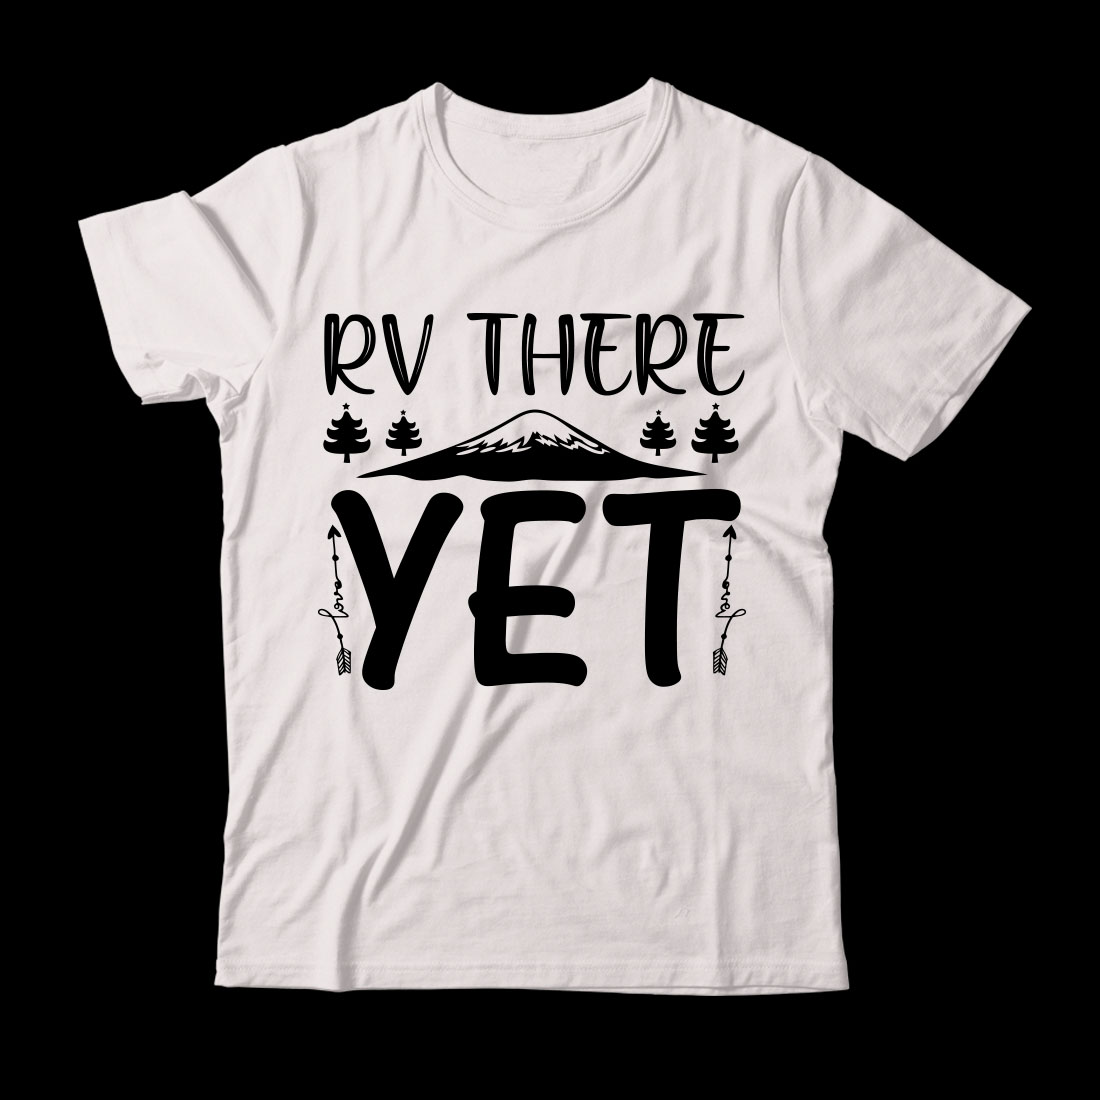 White t - shirt that says rv there yet.